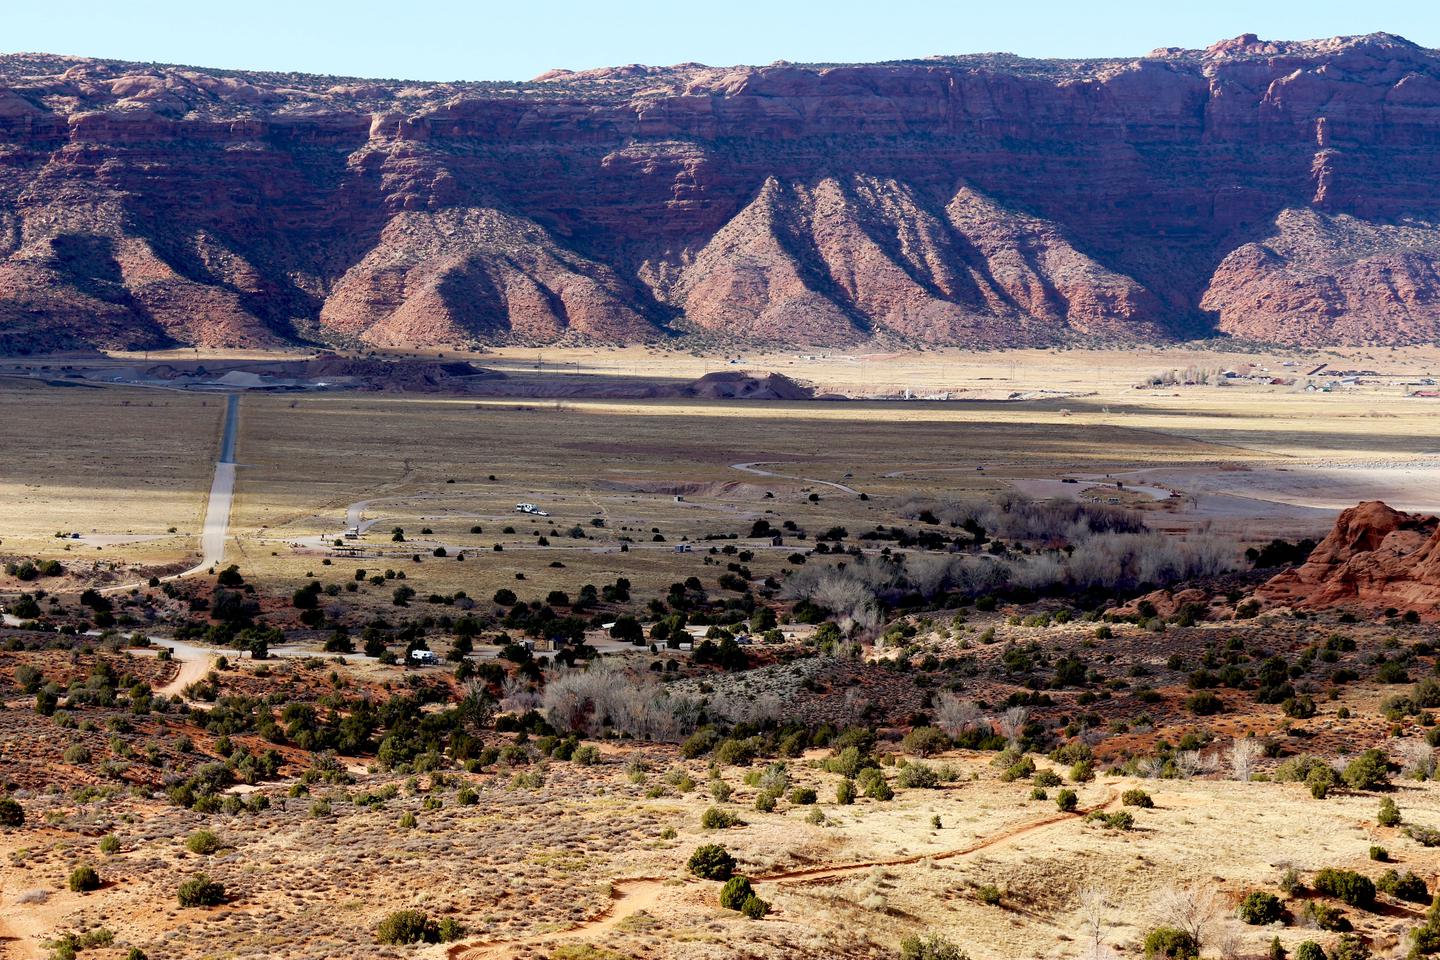 Overview of Ken's Lake Campground with desert cliffs lining the horizon.